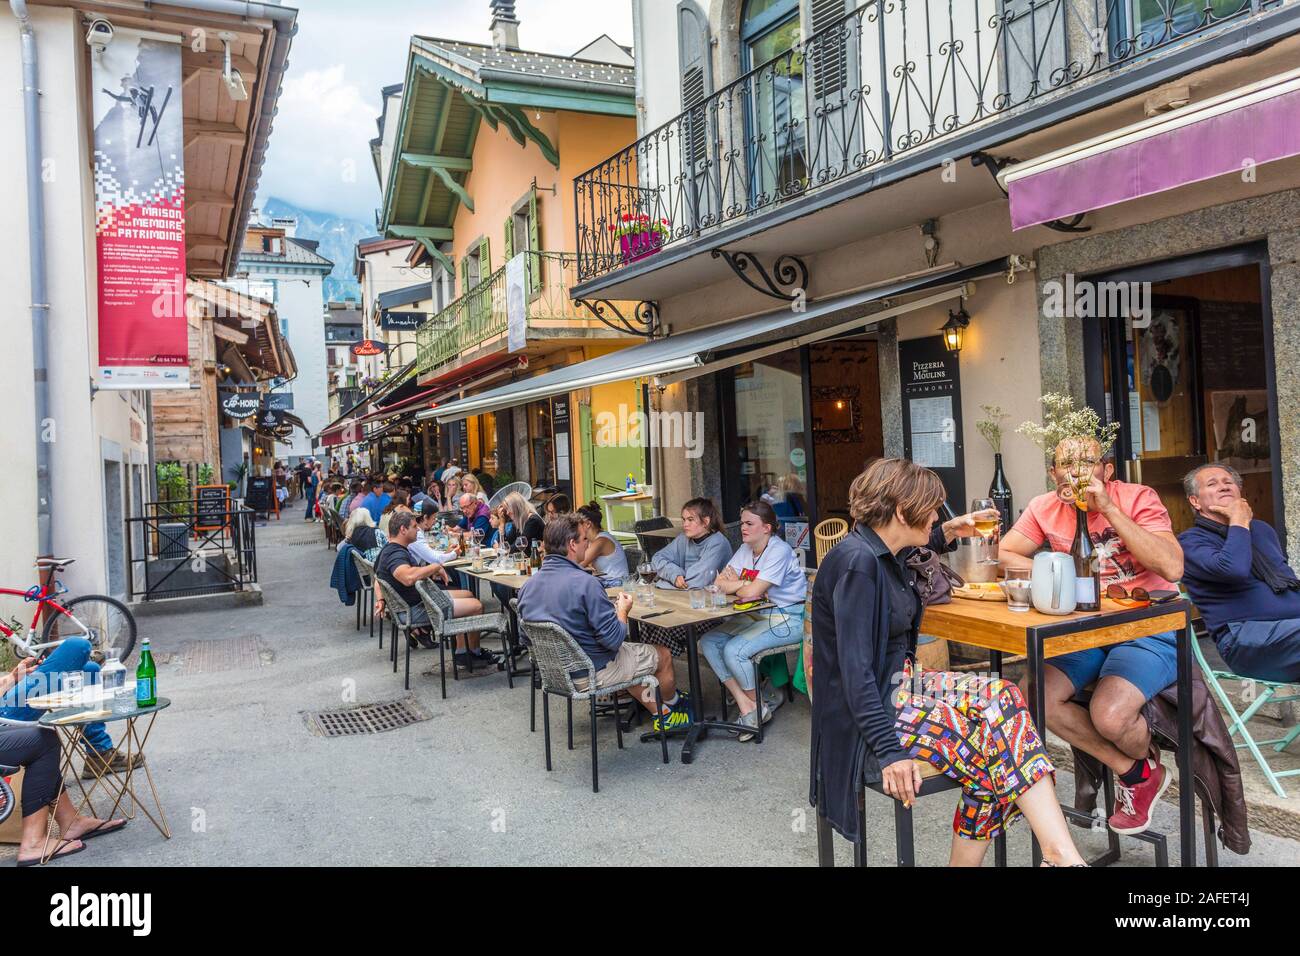 People have dinner at tables laid out in a Chamonix restaurant street. Stock Photo